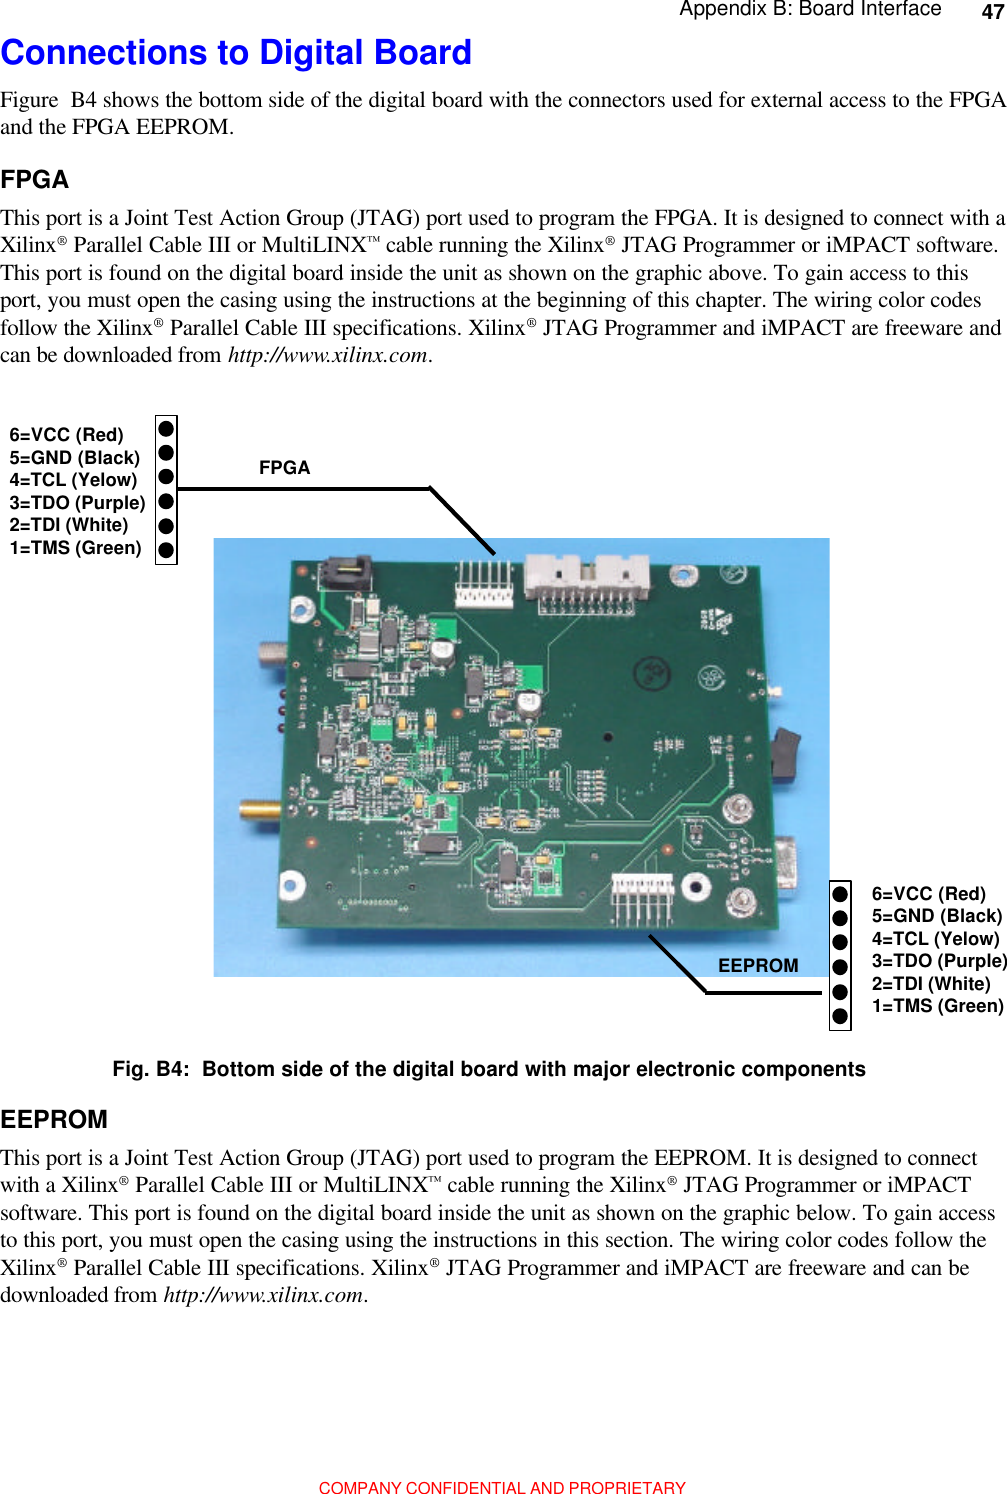 47Appendix B: Board InterfaceCOMPANY CONFIDENTIAL AND PROPRIETARYFig. B4:  Bottom side of the digital board with major electronic componentsEEPROMThis port is a Joint Test Action Group (JTAG) port used to program the EEPROM. It is designed to connectwith a Xilinx® Parallel Cable III or MultiLINX™ cable running the Xilinx® JTAG Programmer or iMPACTsoftware. This port is found on the digital board inside the unit as shown on the graphic below. To gain accessto this port, you must open the casing using the instructions in this section. The wiring color codes follow theXilinx® Parallel Cable III specifications. Xilinx® JTAG Programmer and iMPACT are freeware and can bedownloaded from http://www.xilinx.com.FPGAThis port is a Joint Test Action Group (JTAG) port used to program the FPGA. It is designed to connect with aXilinx® Parallel Cable III or MultiLINX™ cable running the Xilinx® JTAG Programmer or iMPACT software.This port is found on the digital board inside the unit as shown on the graphic above. To gain access to thisport, you must open the casing using the instructions at the beginning of this chapter. The wiring color codesfollow the Xilinx® Parallel Cable III specifications. Xilinx® JTAG Programmer and iMPACT are freeware andcan be downloaded from http://www.xilinx.com.Connections to Digital Board  EEPROM6=VCC (Red)5=GND (Black)4=TCL (Yelow)3=TDO (Purple)2=TDI (White)1=TMS (Green)FPGA6=VCC (Red)5=GND (Black)4=TCL (Yelow)3=TDO (Purple)2=TDI (White)1=TMS (Green)Figure  B4 shows the bottom side of the digital board with the connectors used for external access to the FPGAand the FPGA EEPROM.